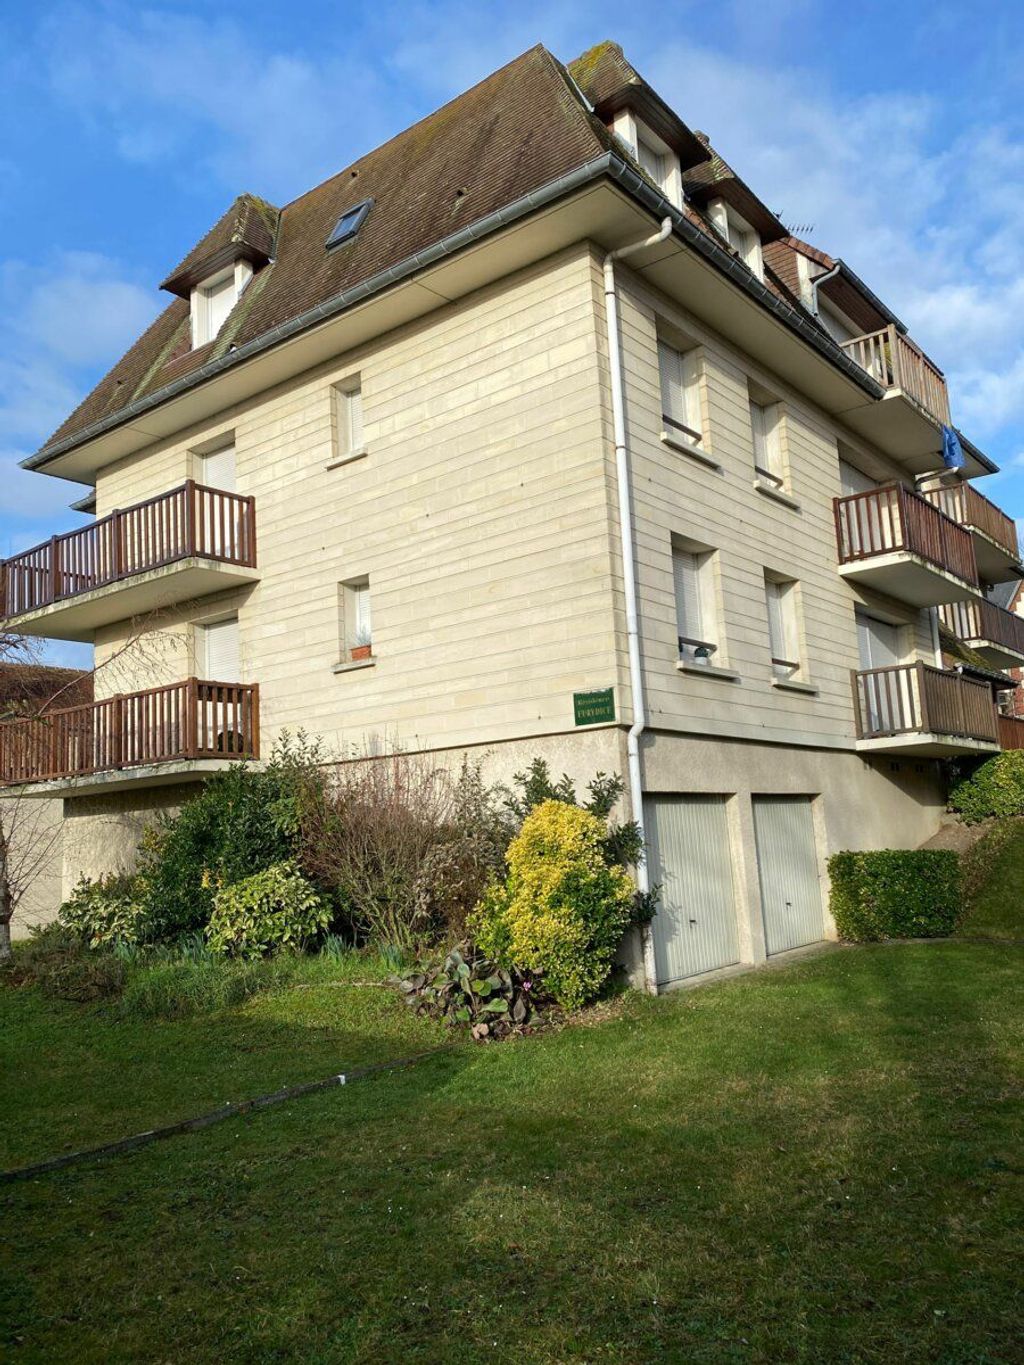 Achat appartement 1 pièce(s) Cabourg